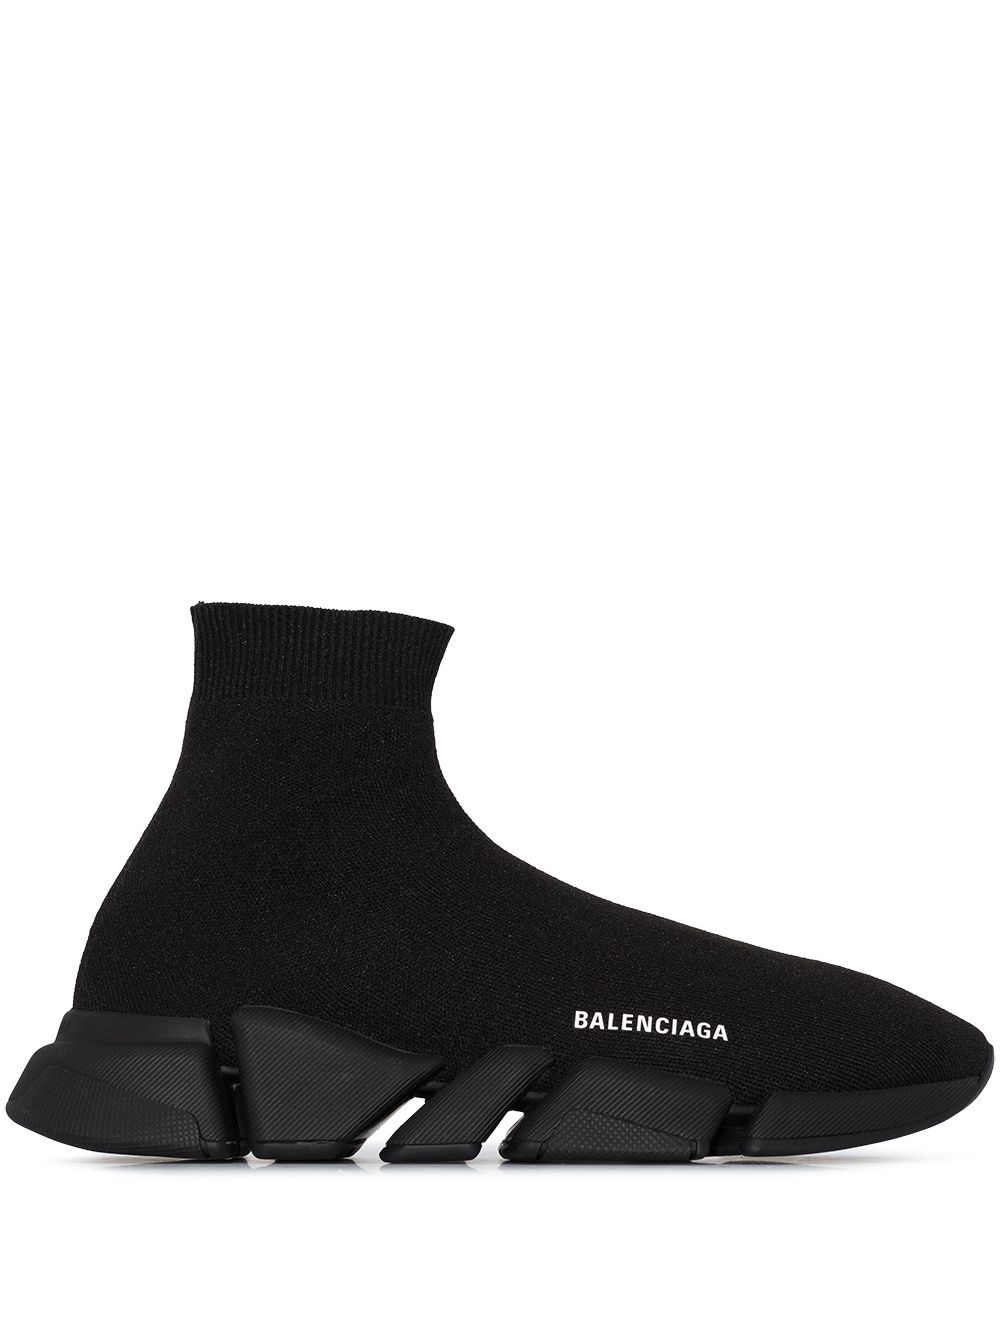 balenciaga SPEED SNEAKERS available on 